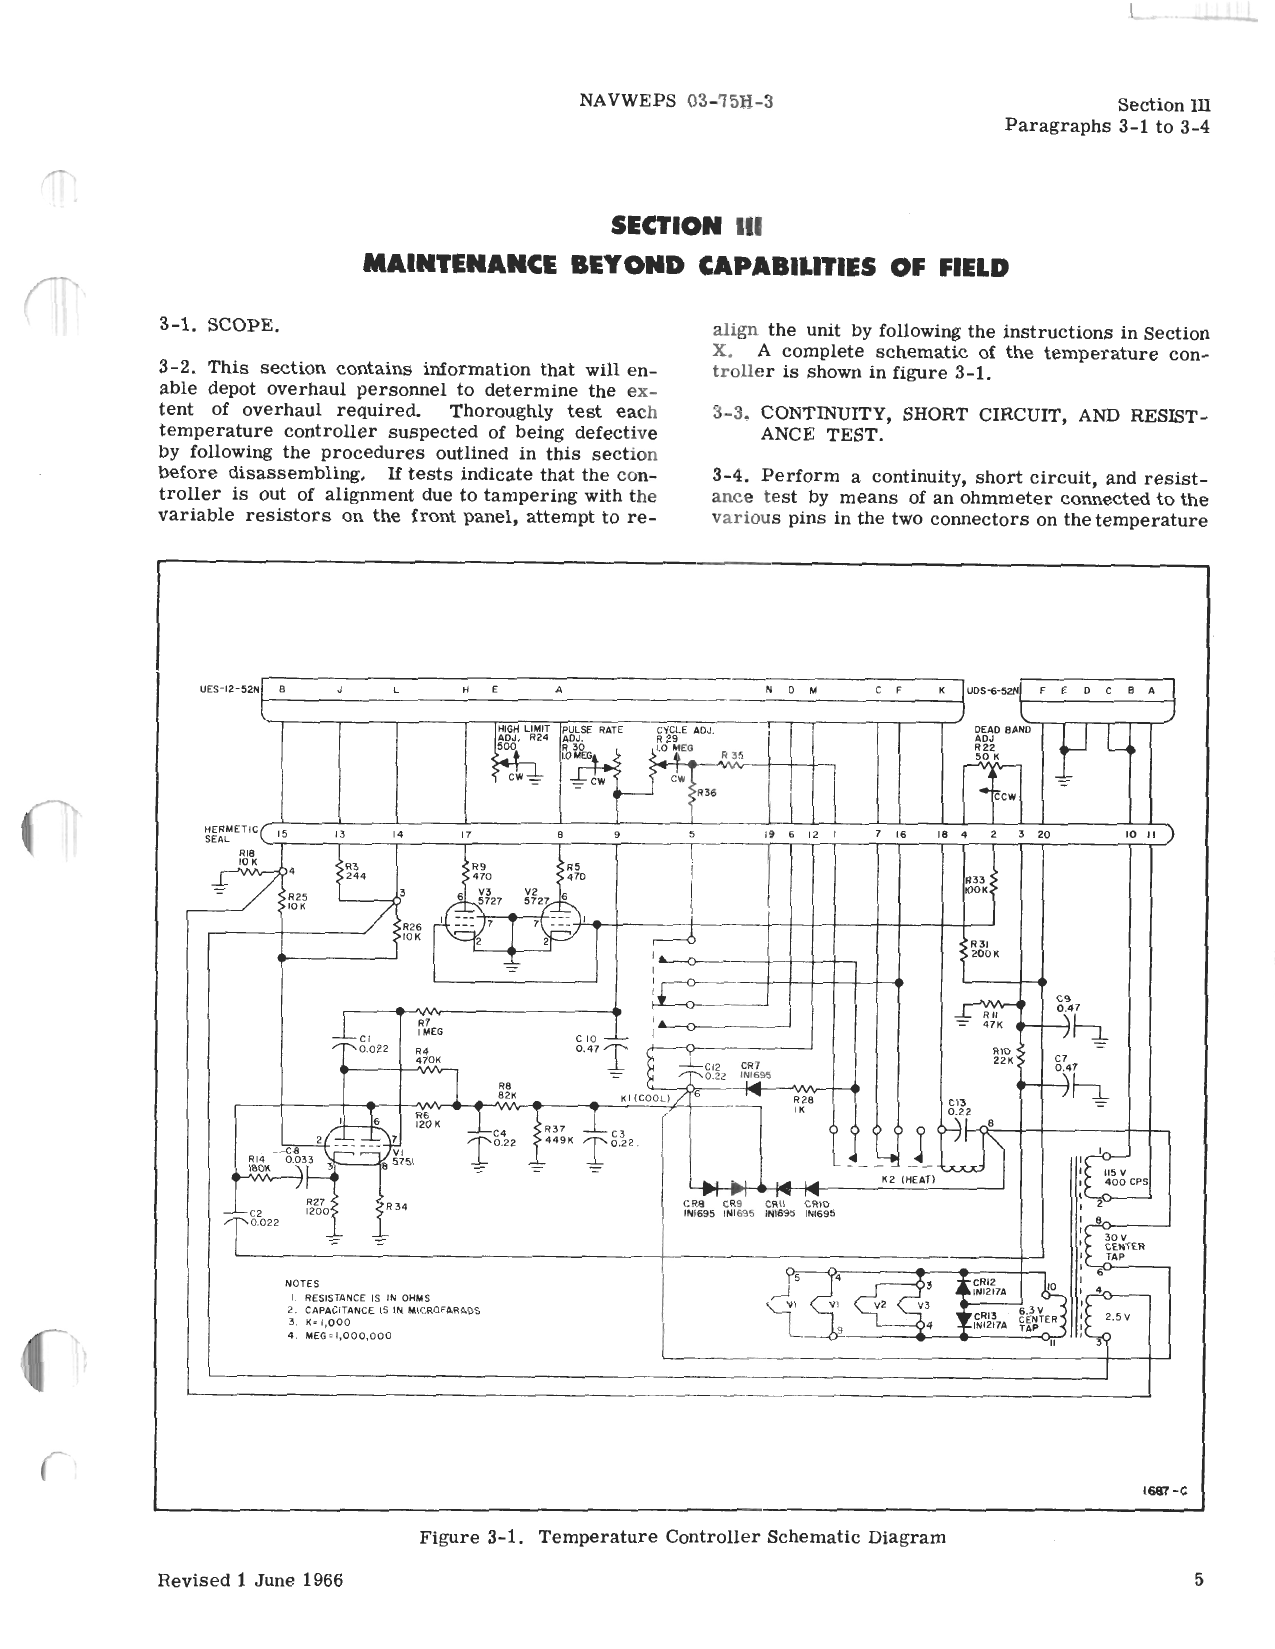 Sample page 9 from AirCorps Library document: Overhaul Instructions for Temperature Controller - Parts 25730028-03 and 25730028-04 